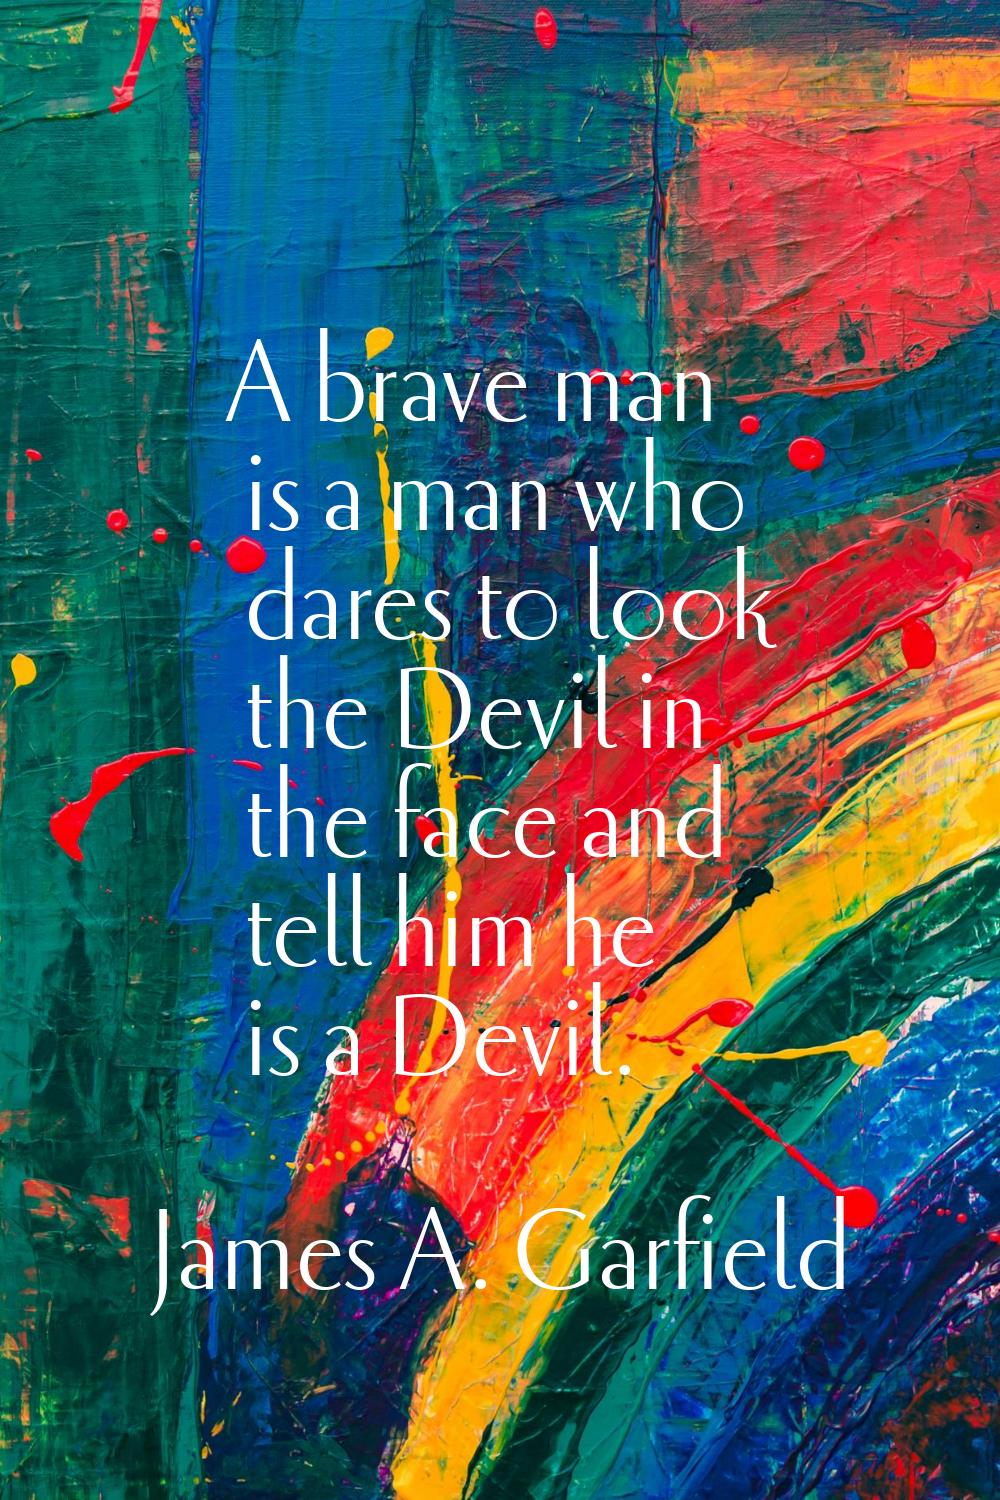 A brave man is a man who dares to look the Devil in the face and tell him he is a Devil.